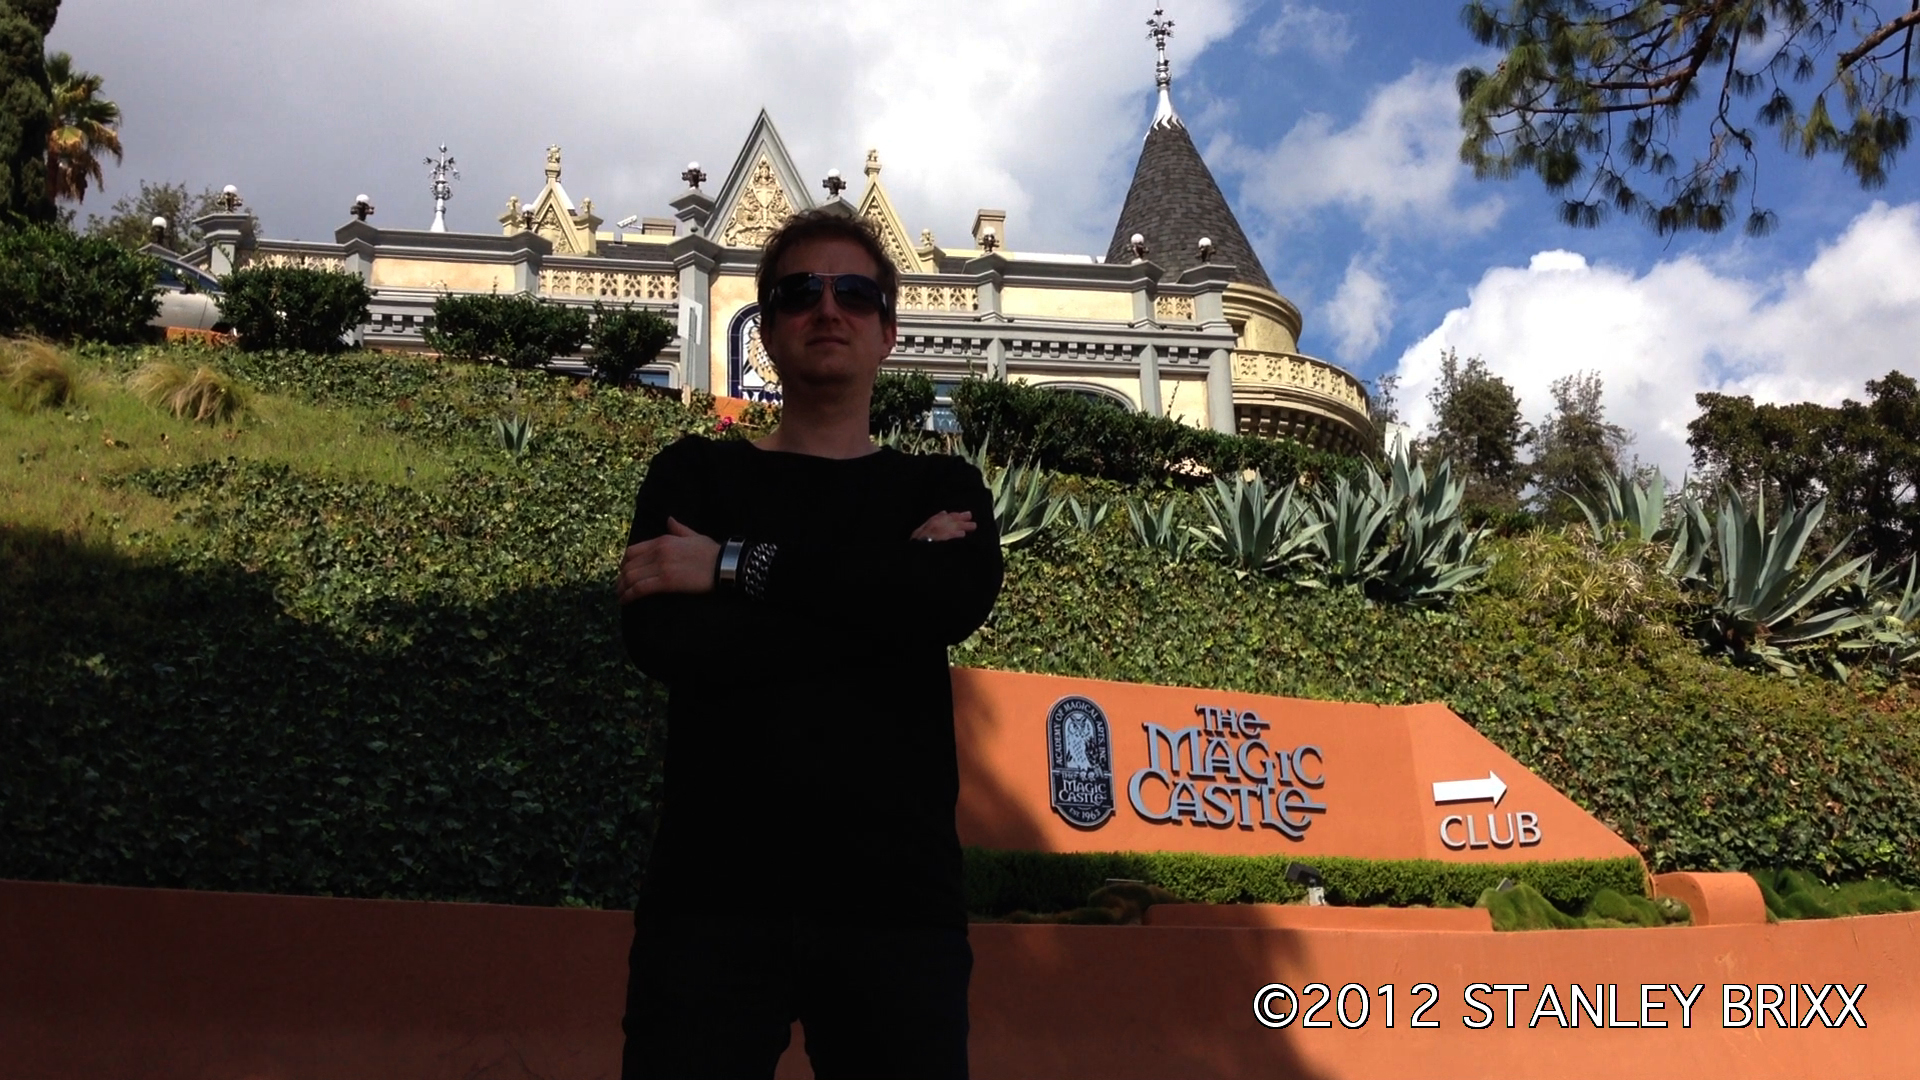 At the Magic Castle